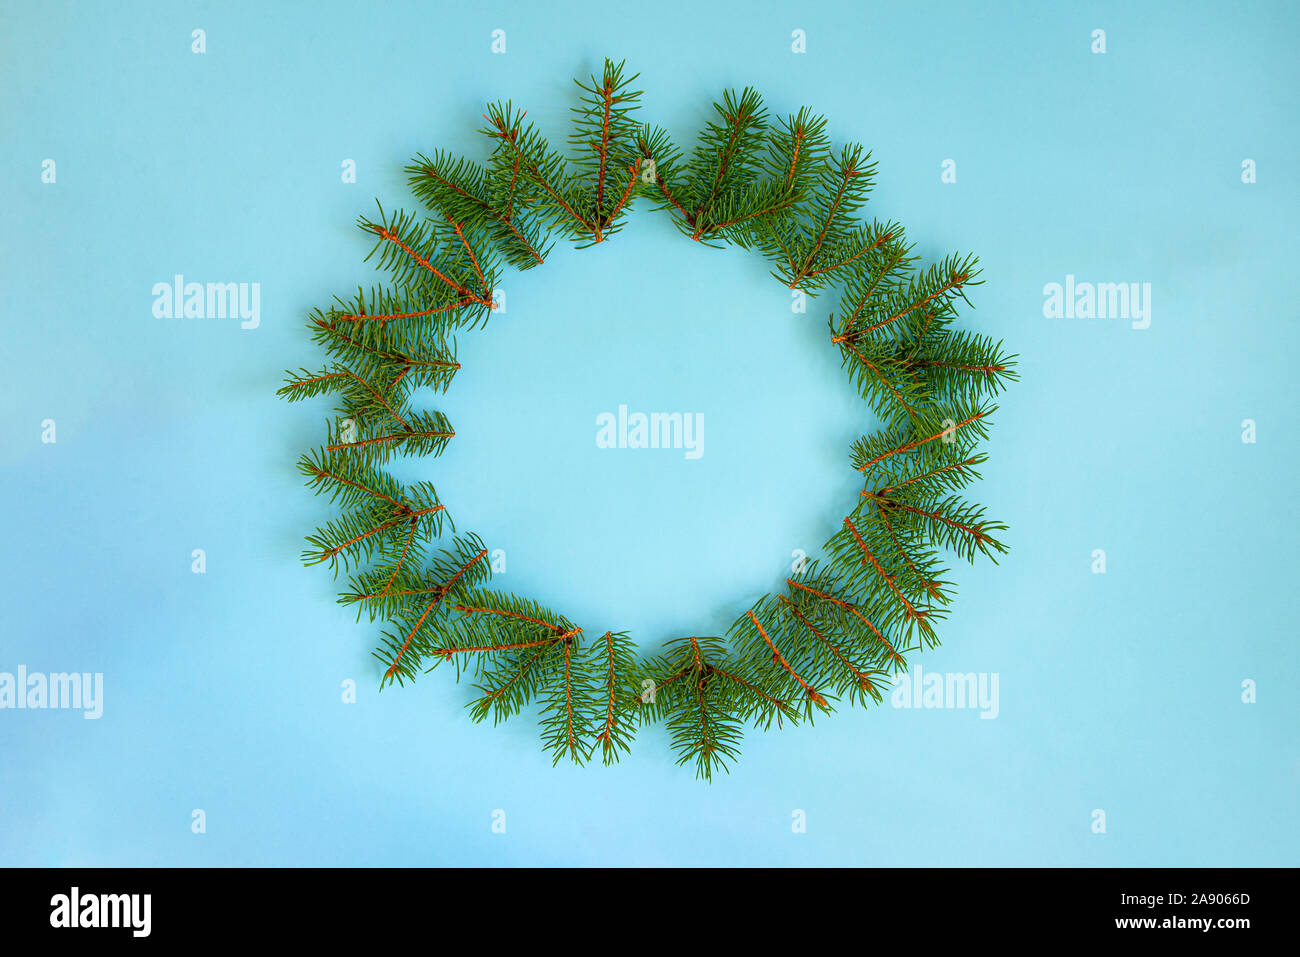 A wreath of pine tree branches over blue background. Stock Photo